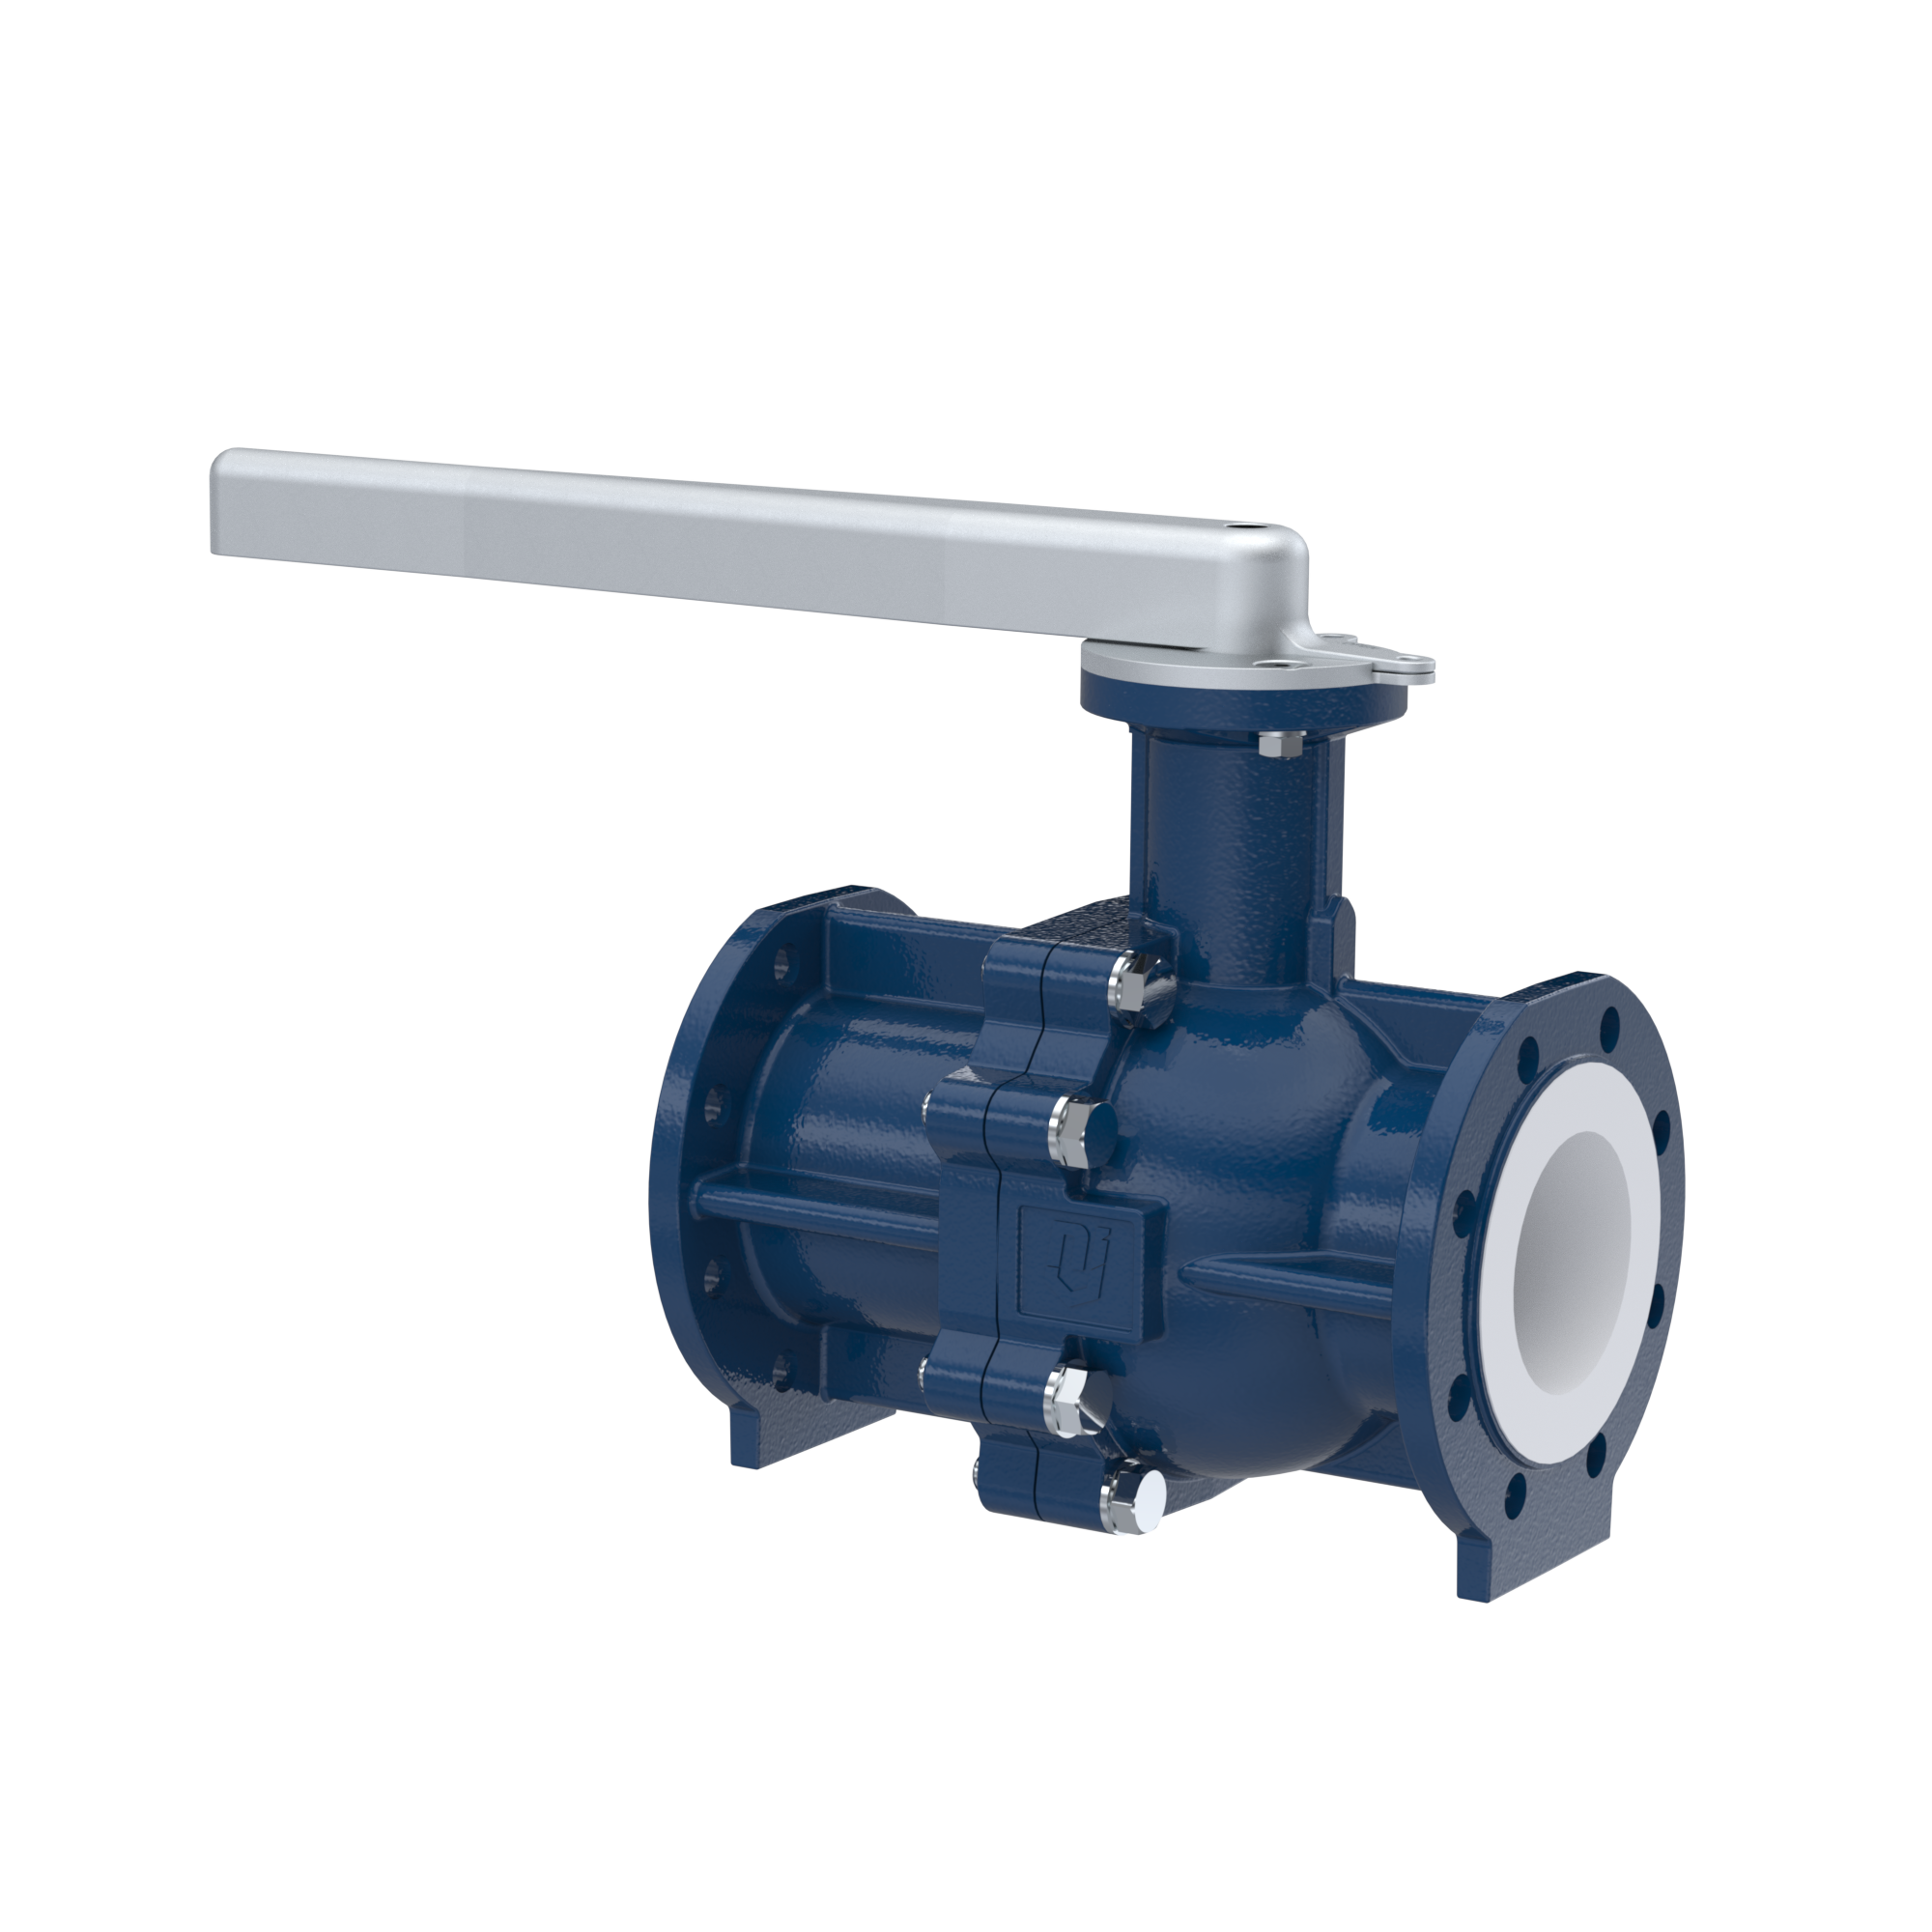 PFA-flange ball valve FK13 DN80 - 3" inch PN10/16 made of spheroidal graphite cast iron with lever hand